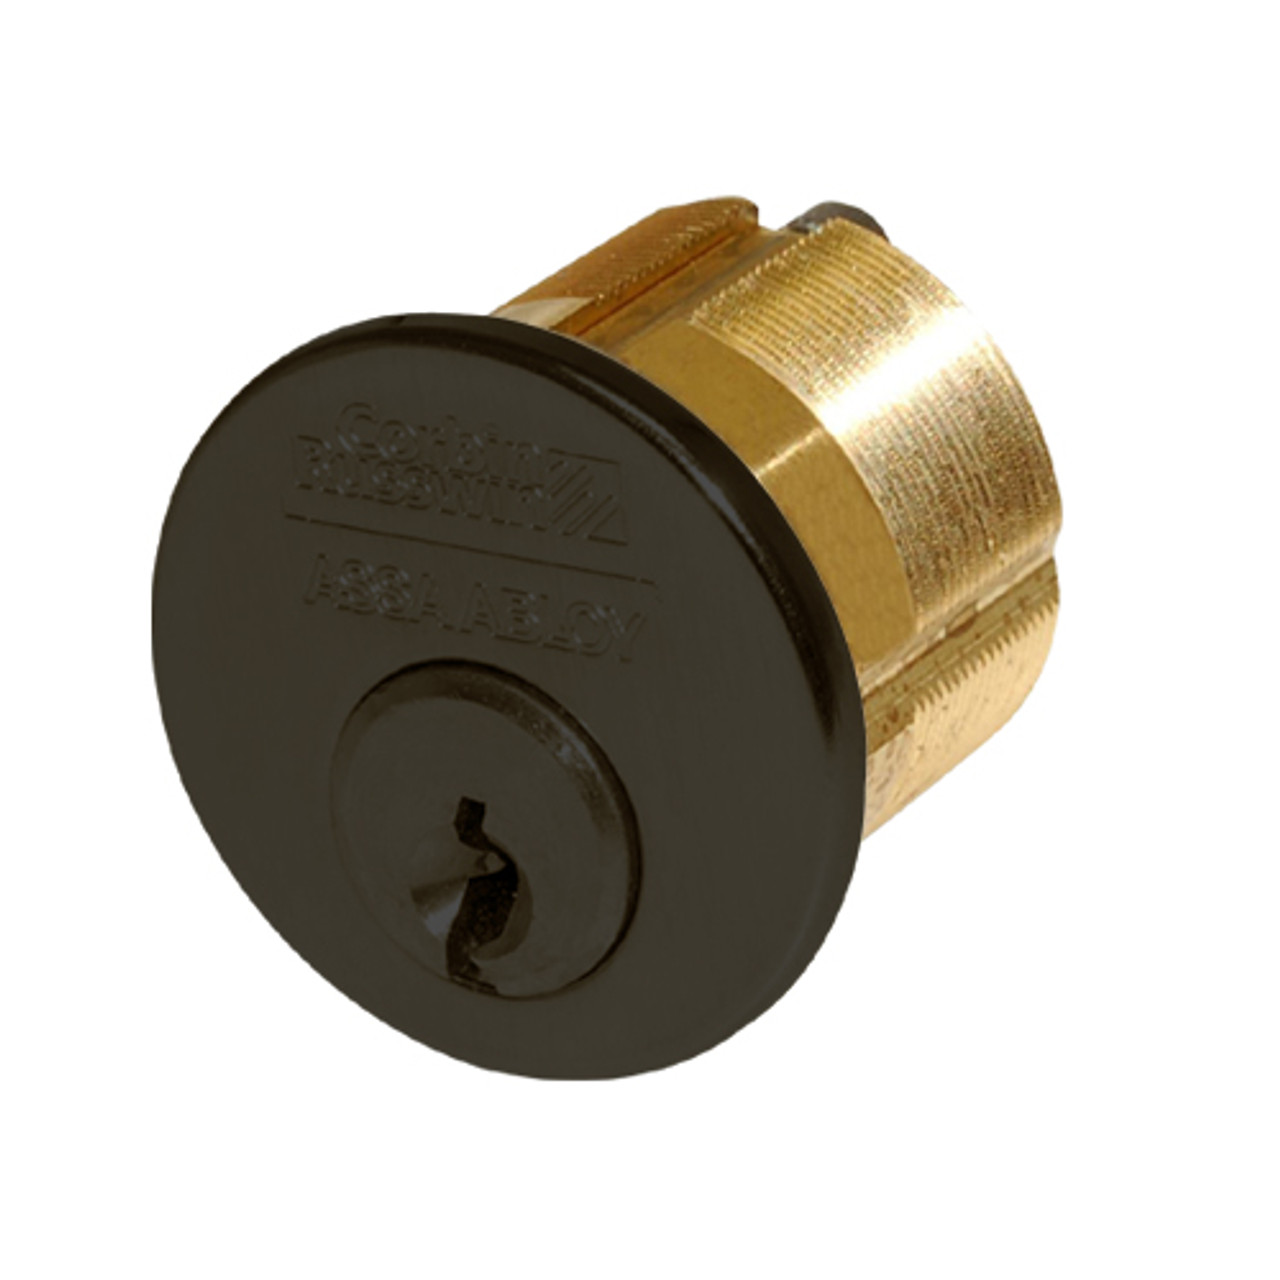 CR1000-118-A01-6-L1-613 Corbin Conventional Mortise Cylinder for Mortise Lock and DL3000 Deadlocks with Cloverleaf Cam in Oil Rubbed Bronze Finish